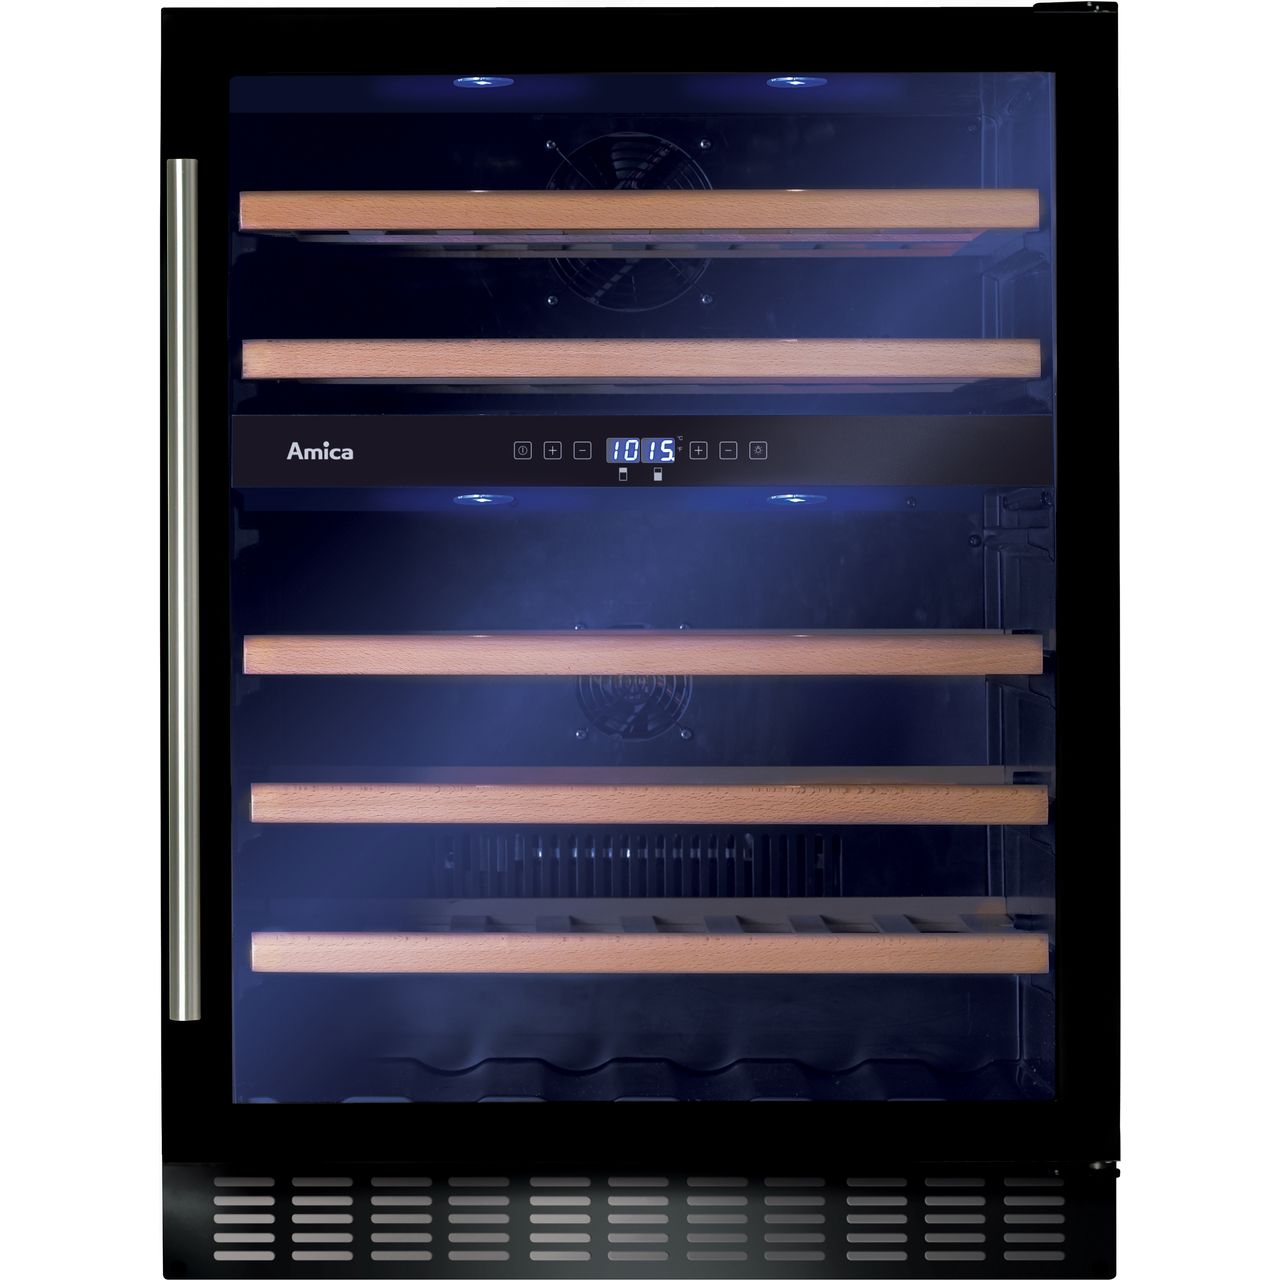 Amica AWC601BL Wine Cooler Review